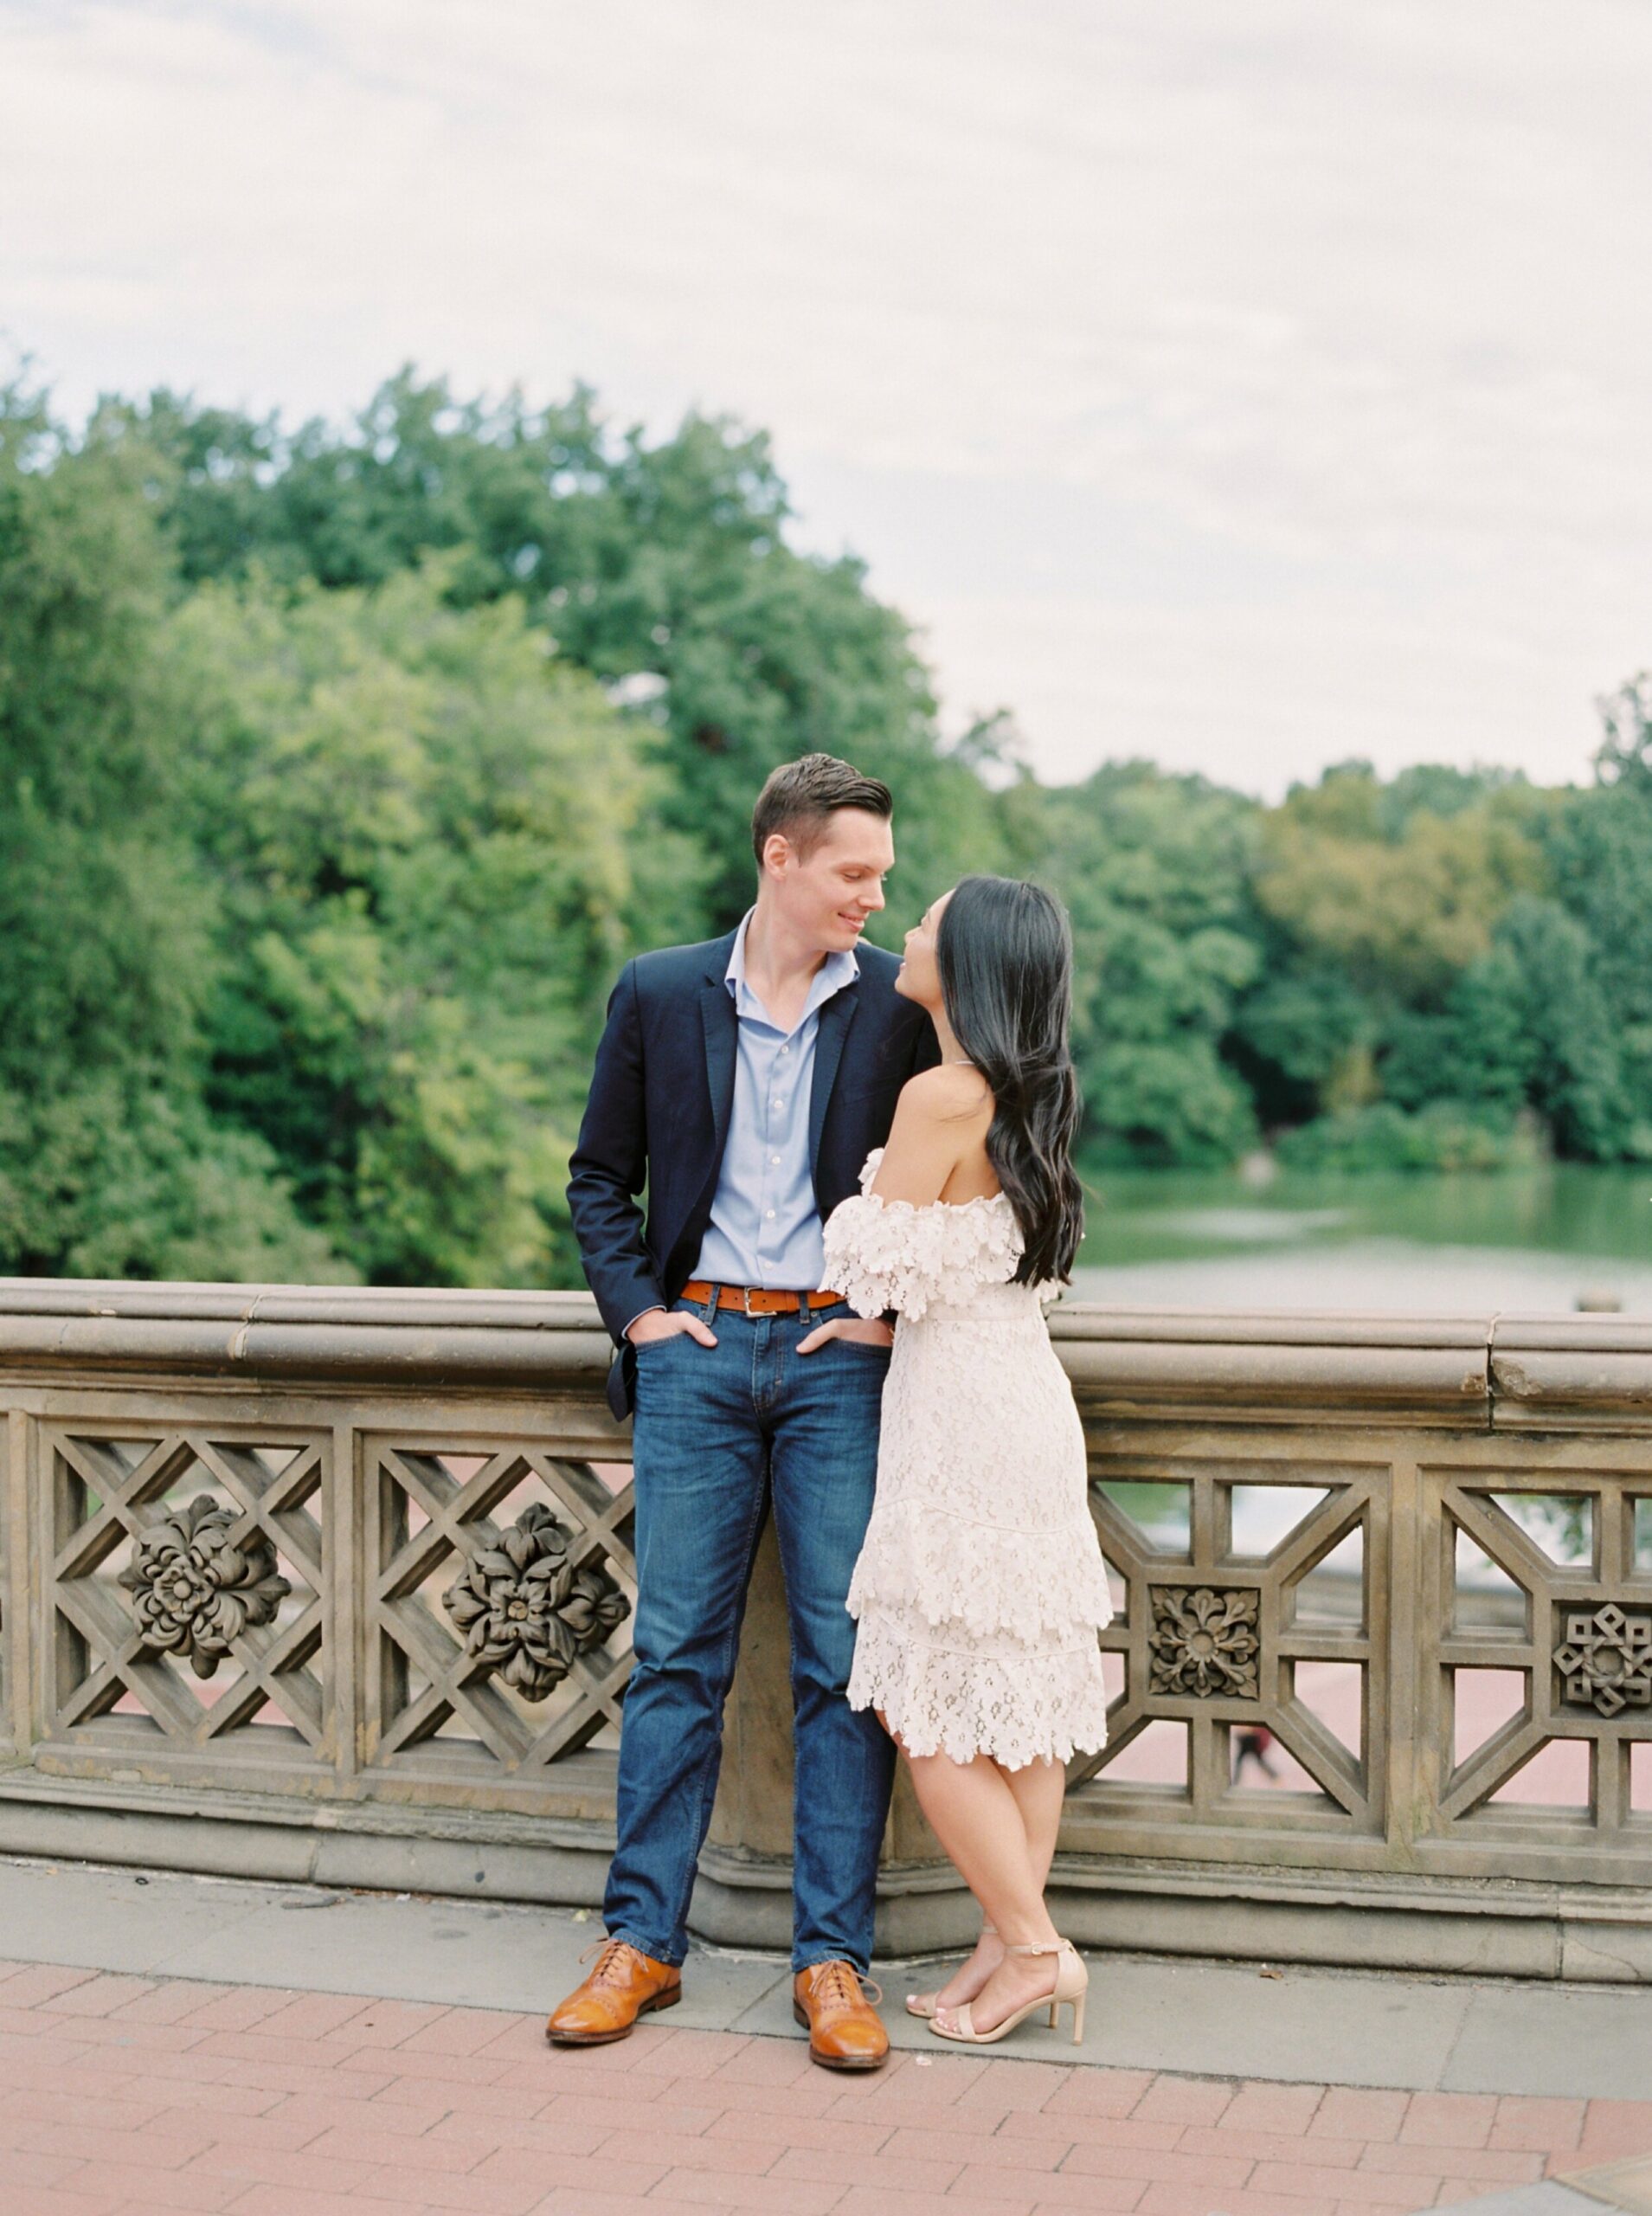  NYC central park engagement photographer | Justine Milton finr at film photography 